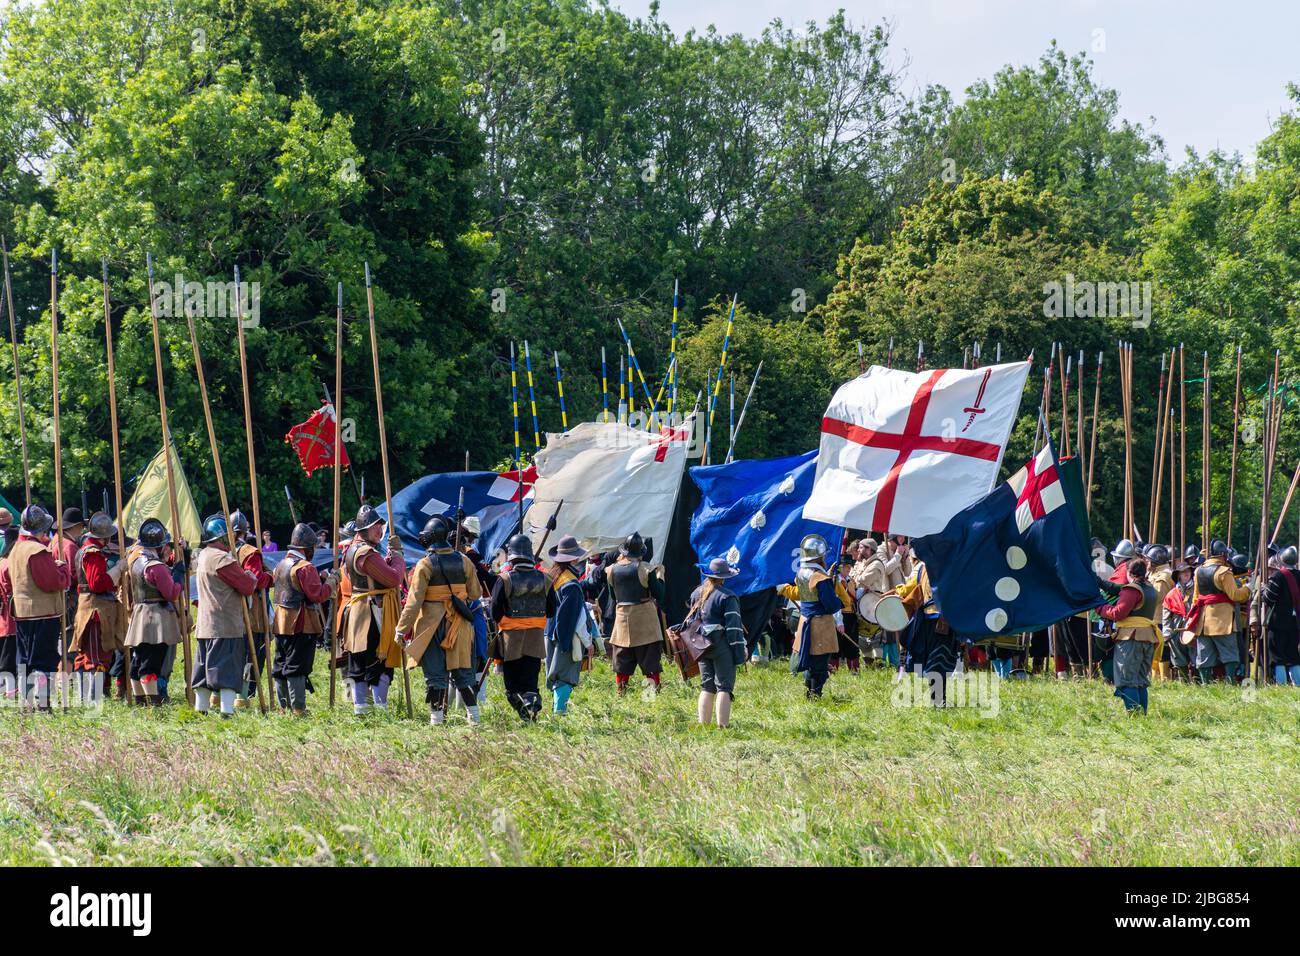 The Sealed Knot performing an English civil war re-enactment of the Basing House Siege for the Queen's Platinum Jubilee, June 2022, Hampshire, UK Stock Photo